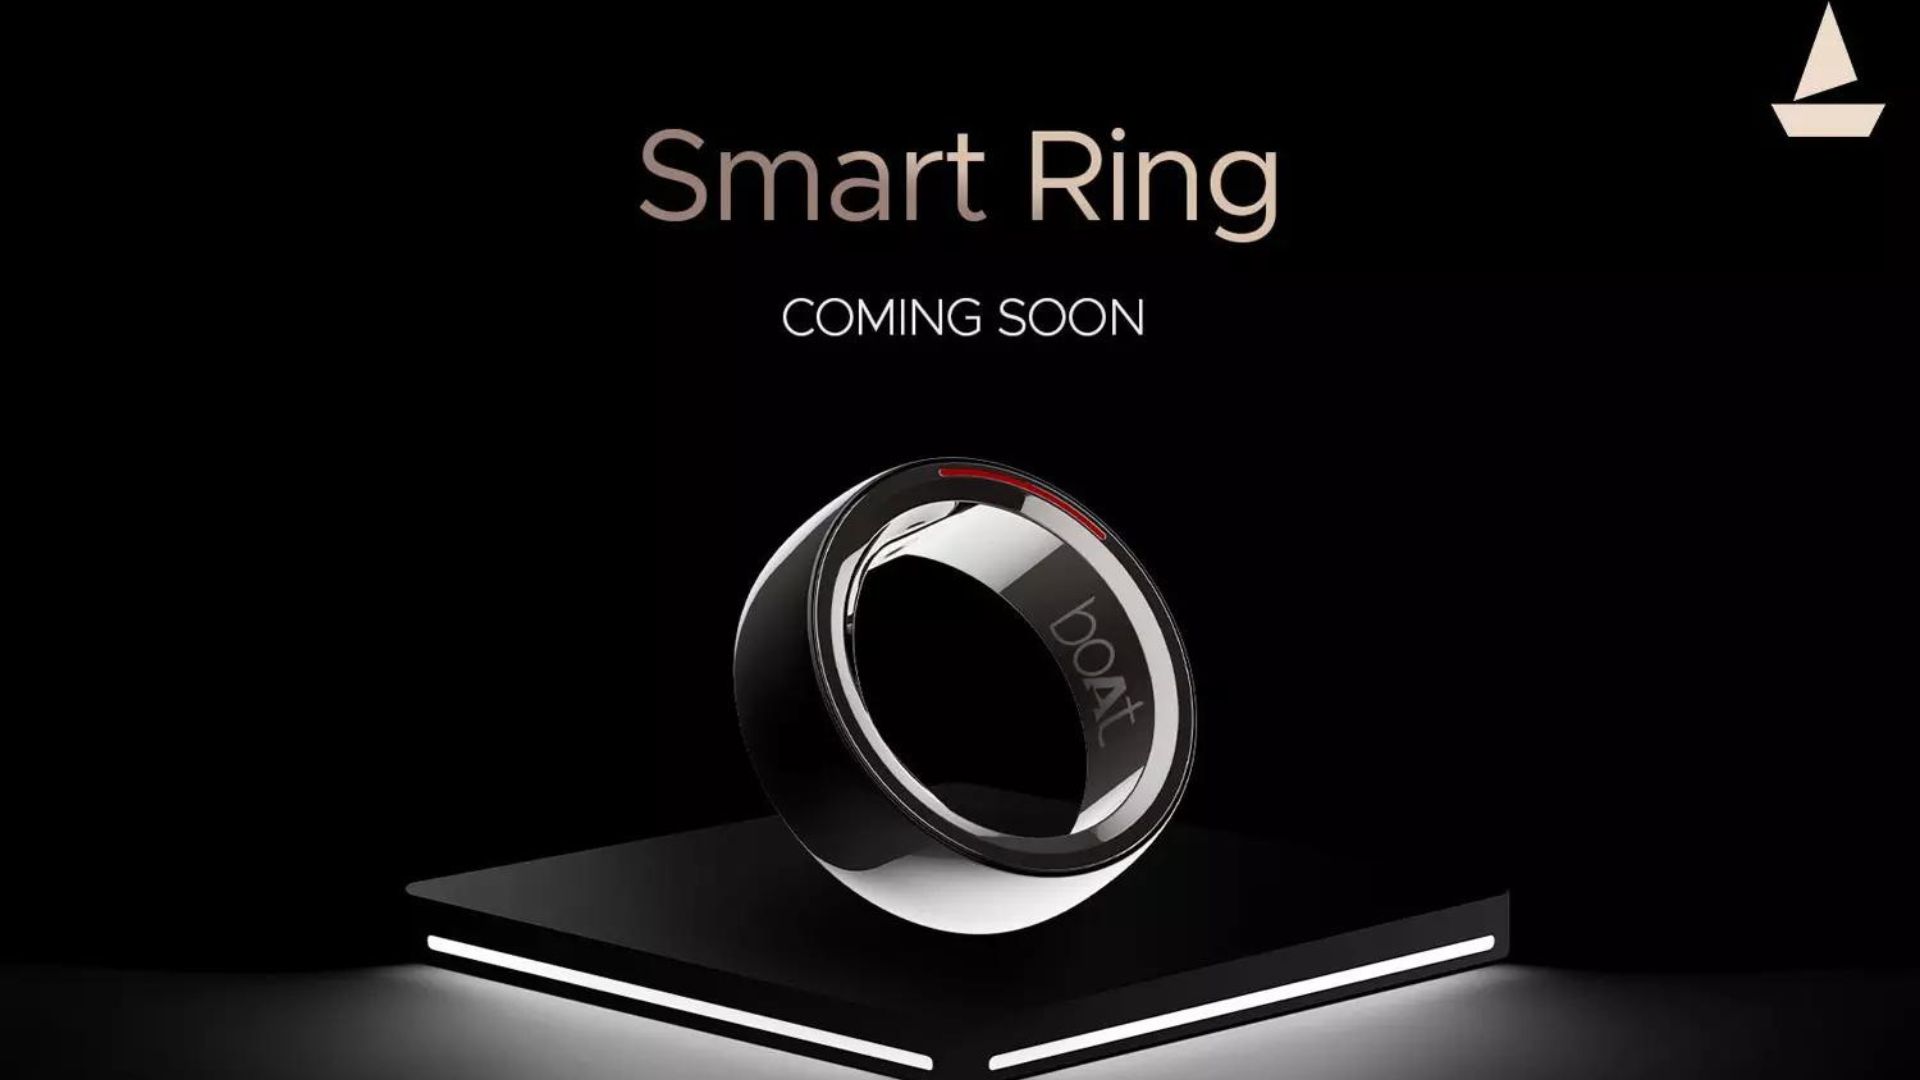 boAt Announces its First Health Tracker Smart Ring